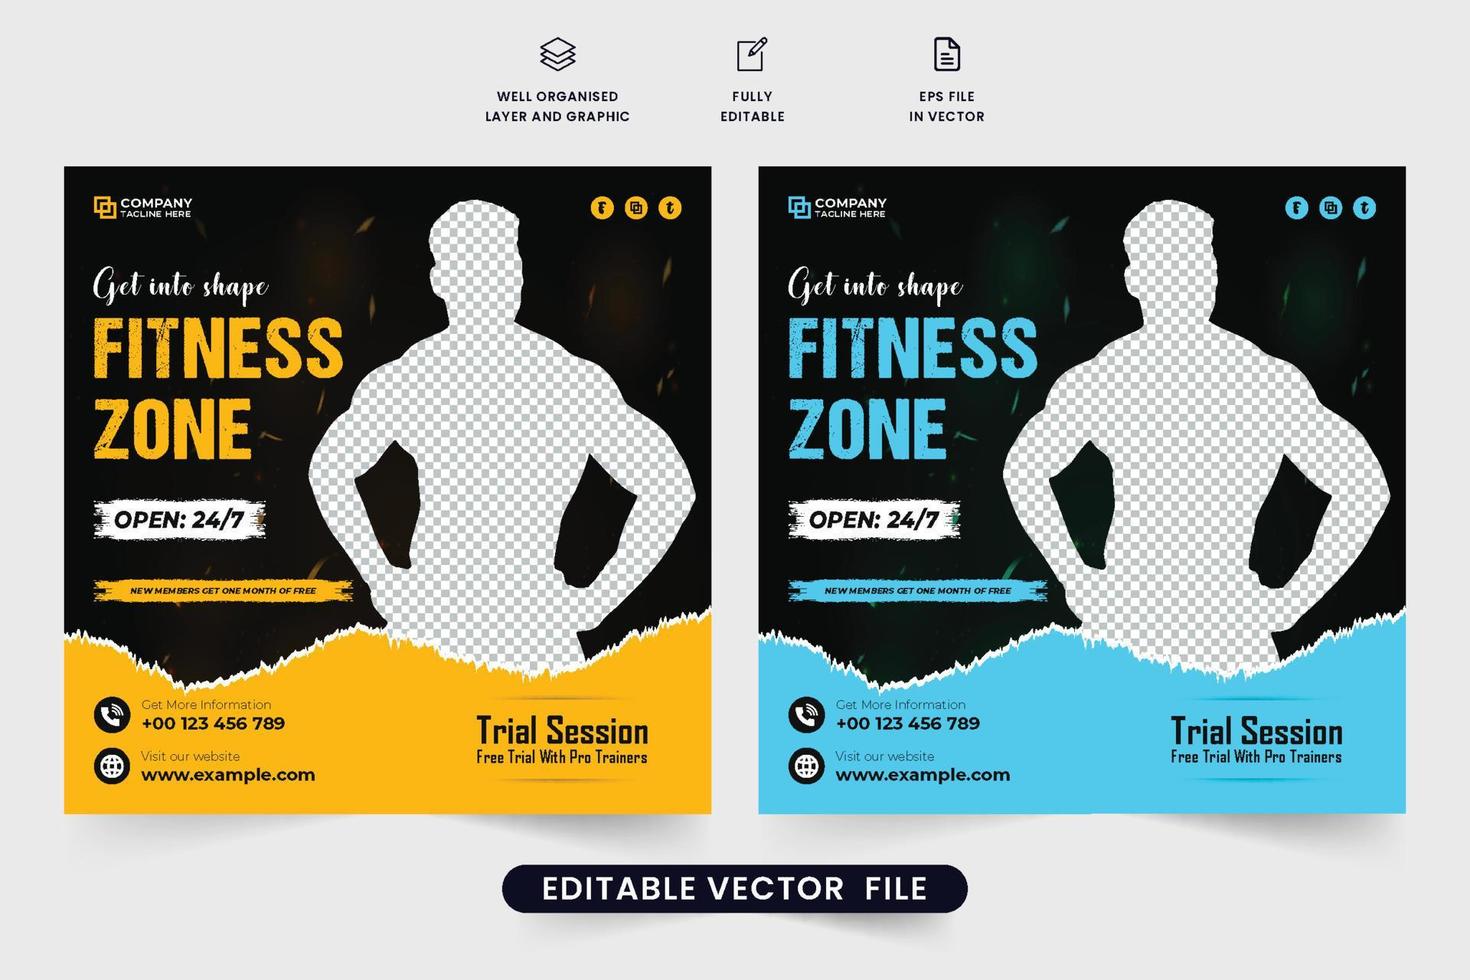 Gym promotional social media post design with photo placeholders. Gym business promotional poster vector with discount offers. Fitness gym advertisement template design with yellow and blue colors.